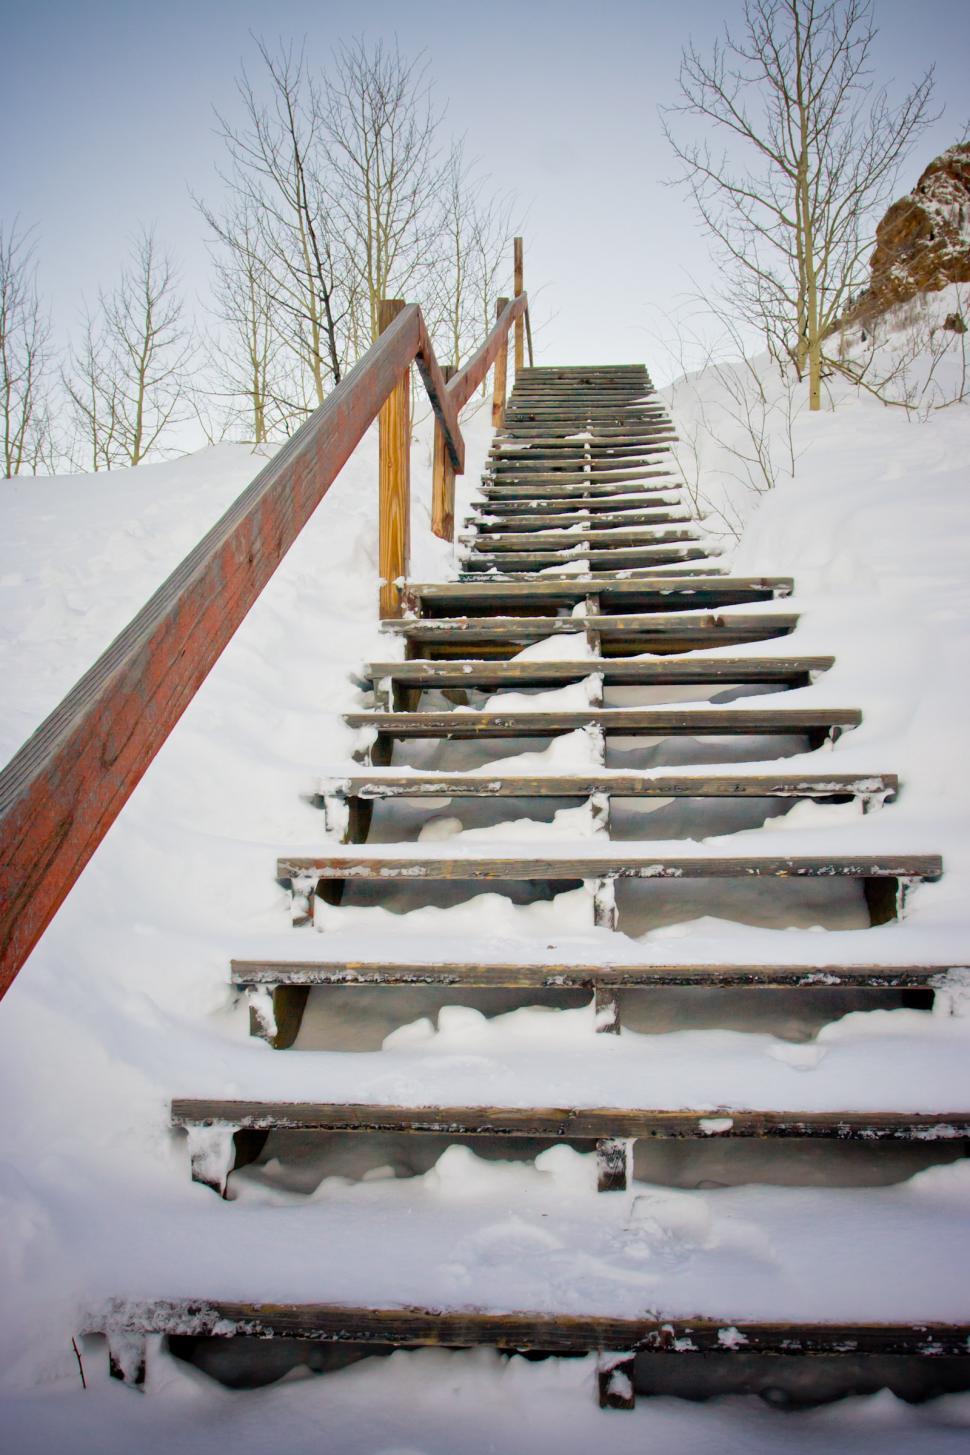 Free Image of Snow-Covered Stairs in Winter 